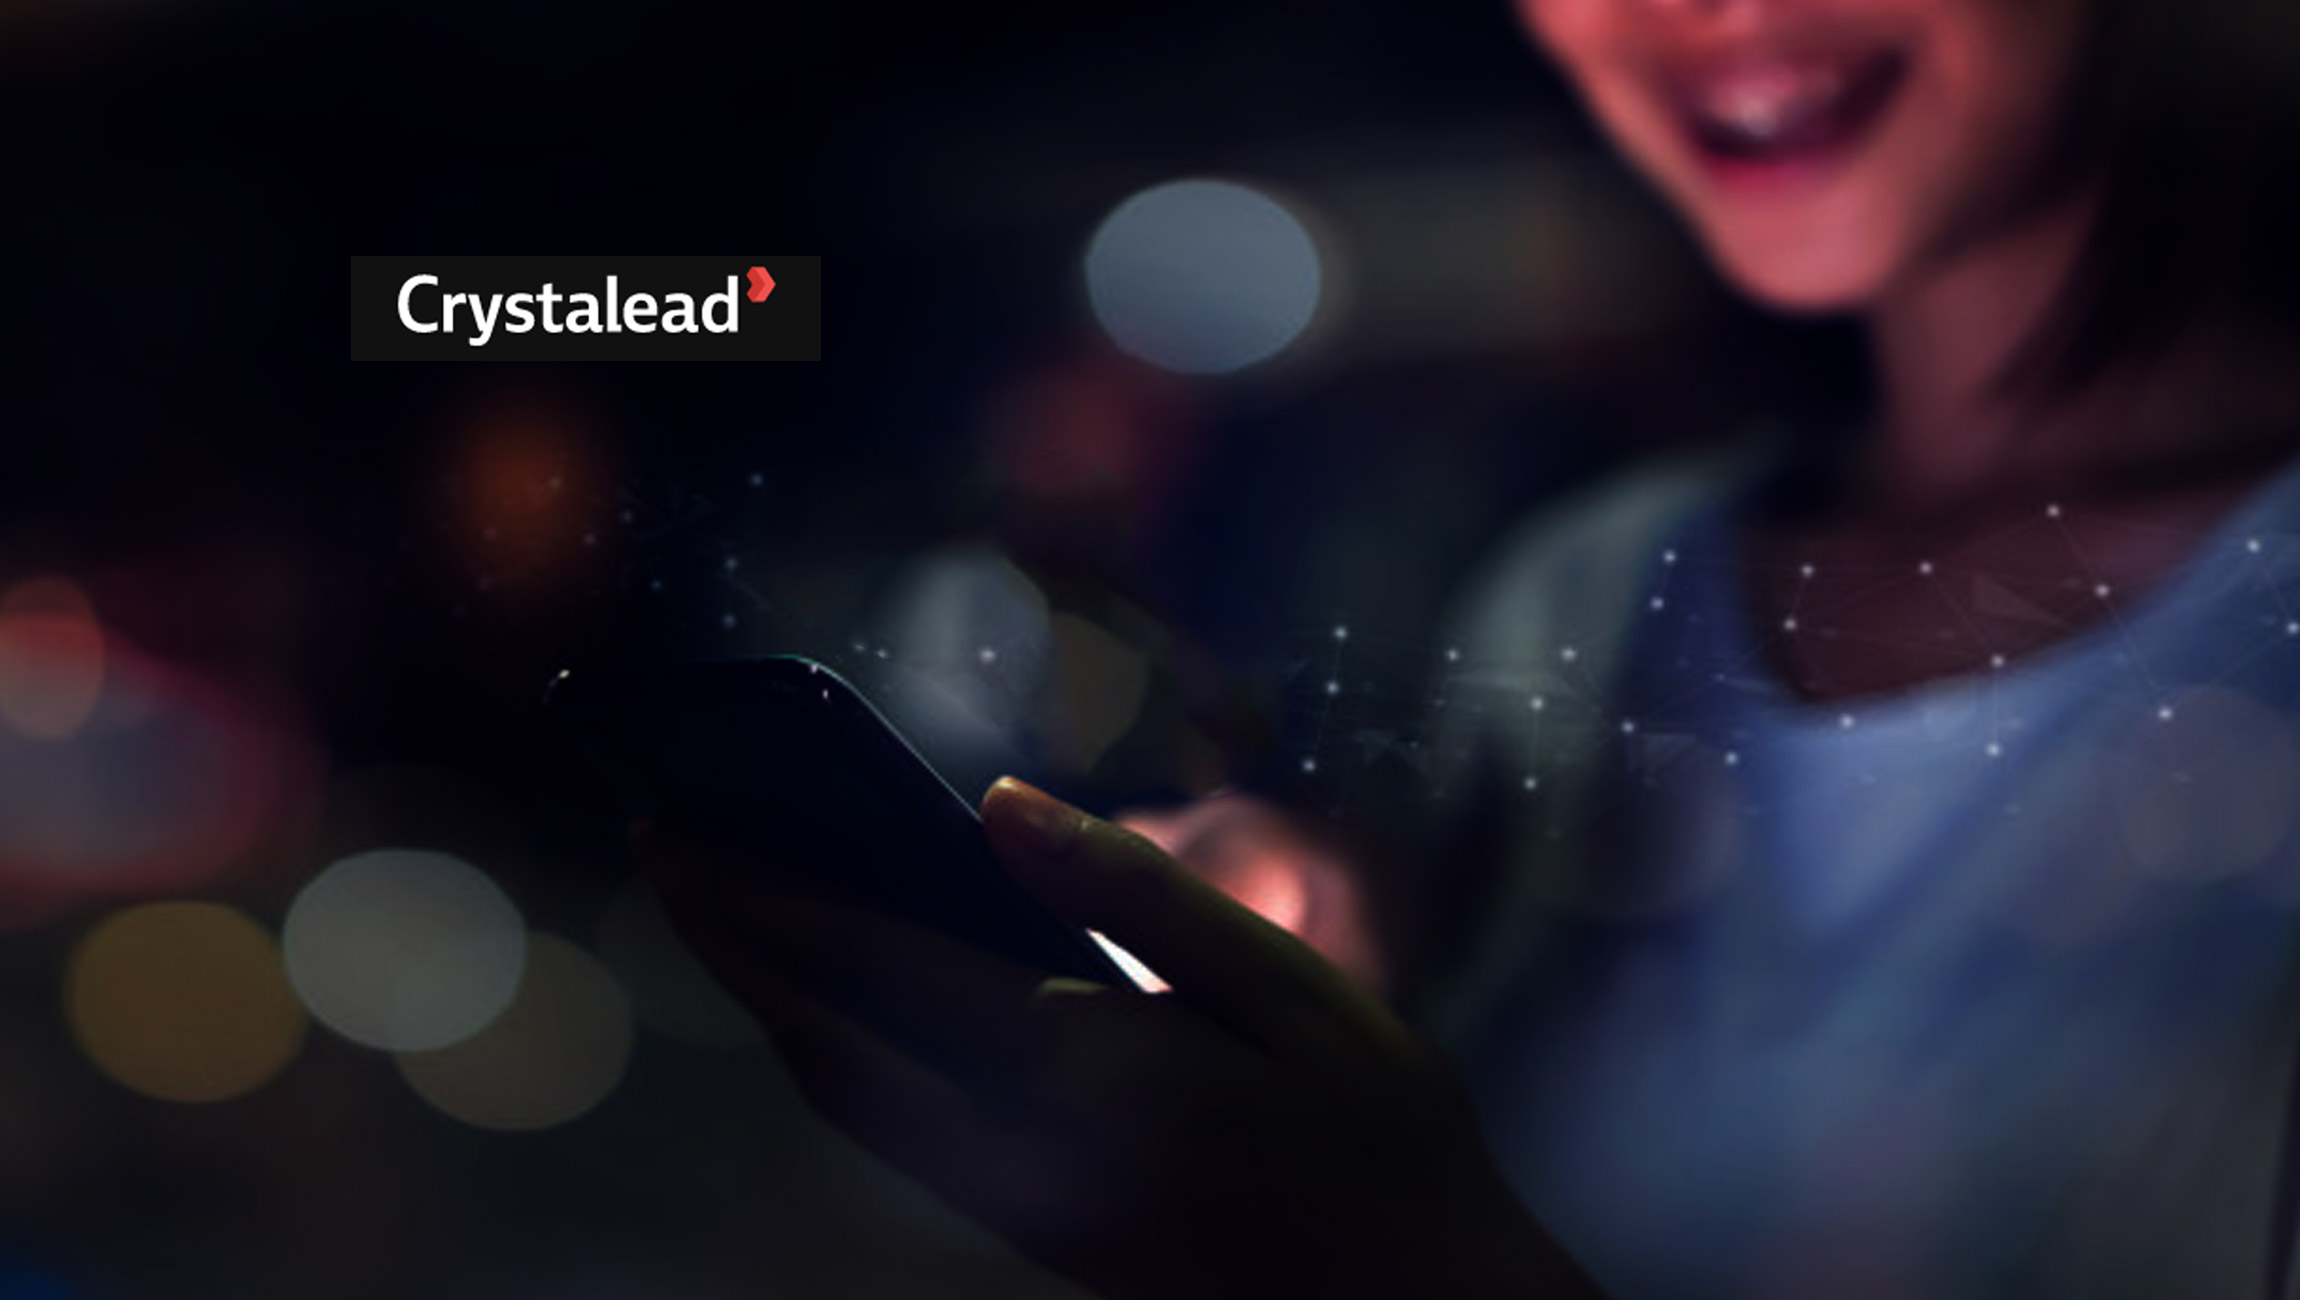 Crystalead Upgrades Services, Now Offers Live Chat Support